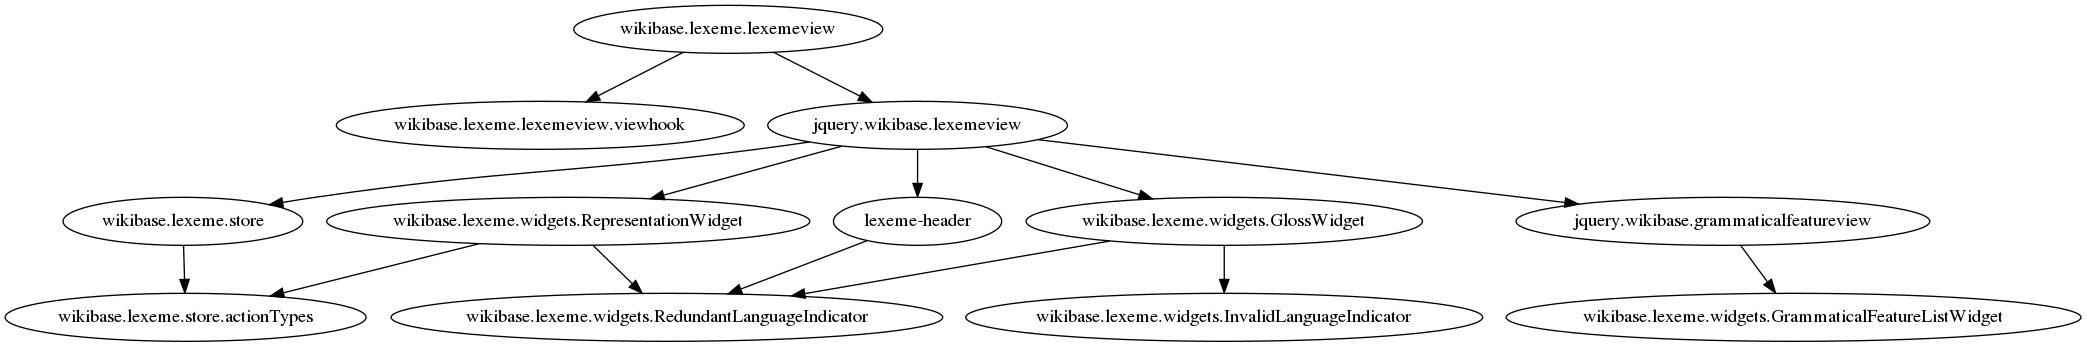 wikibase.lexeme.lexemeview.png (347×2 px, 87 KB)